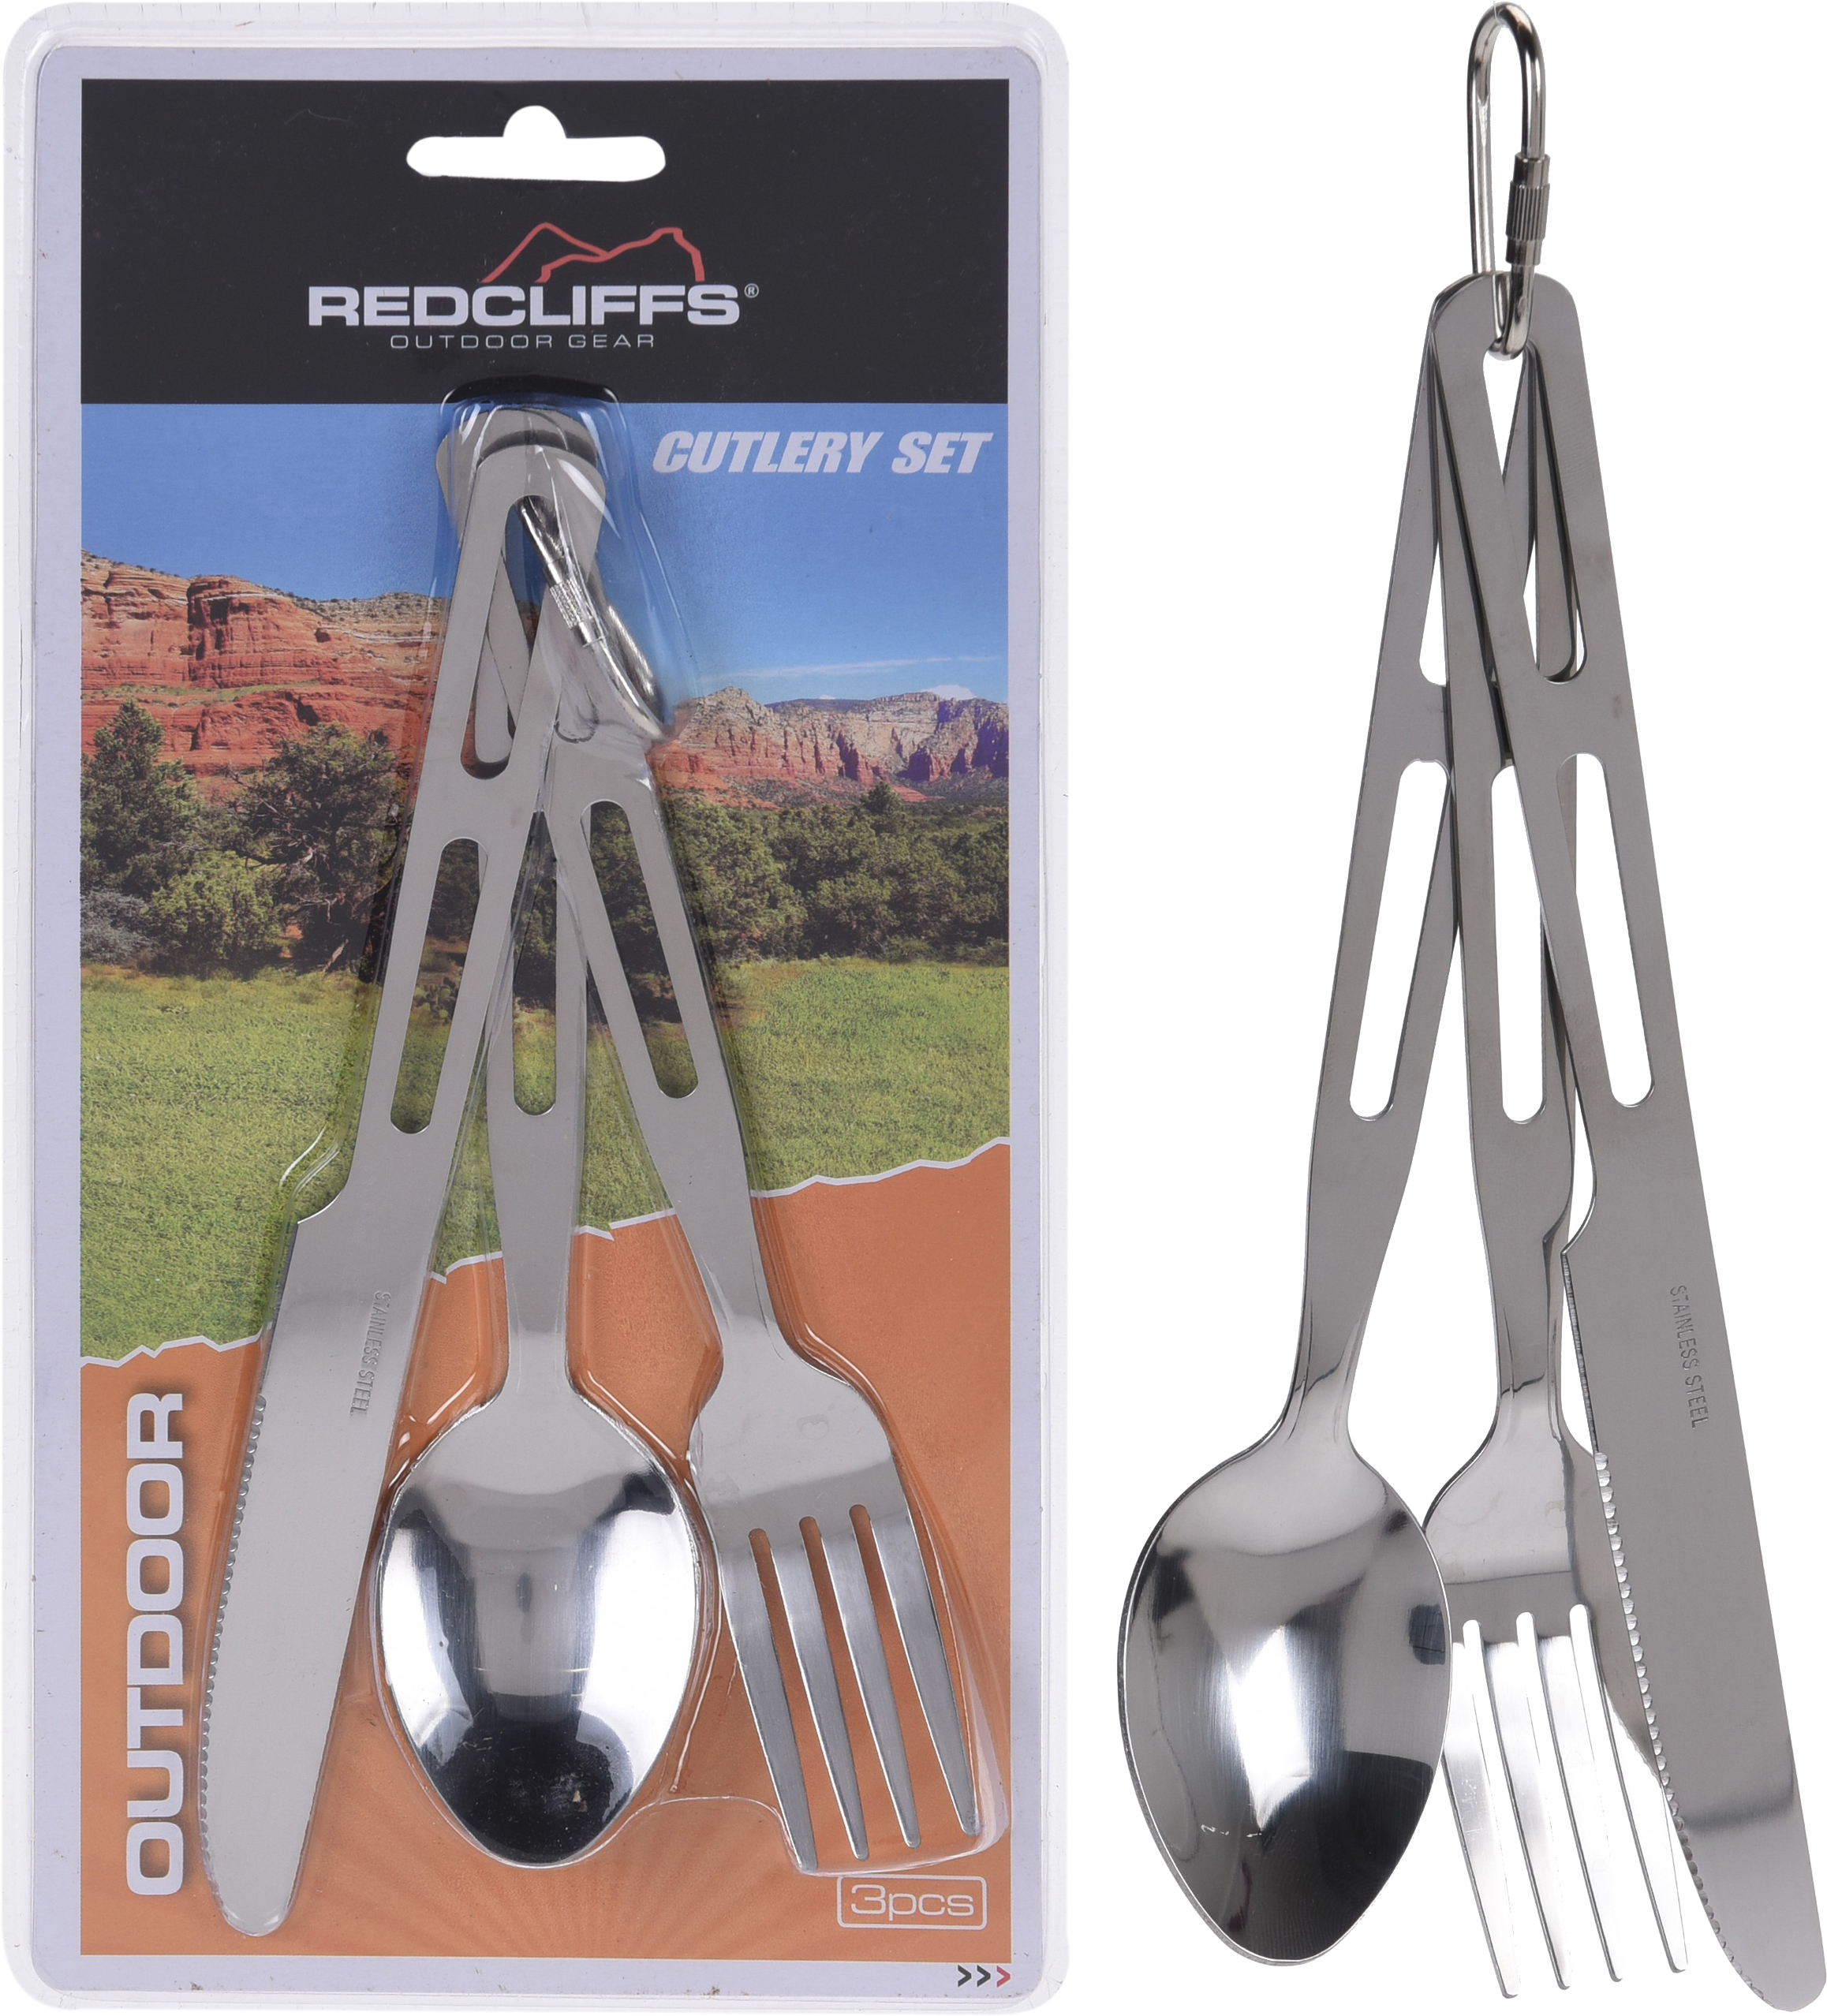 CUTLERY SET 3PCS FOR CAMPING